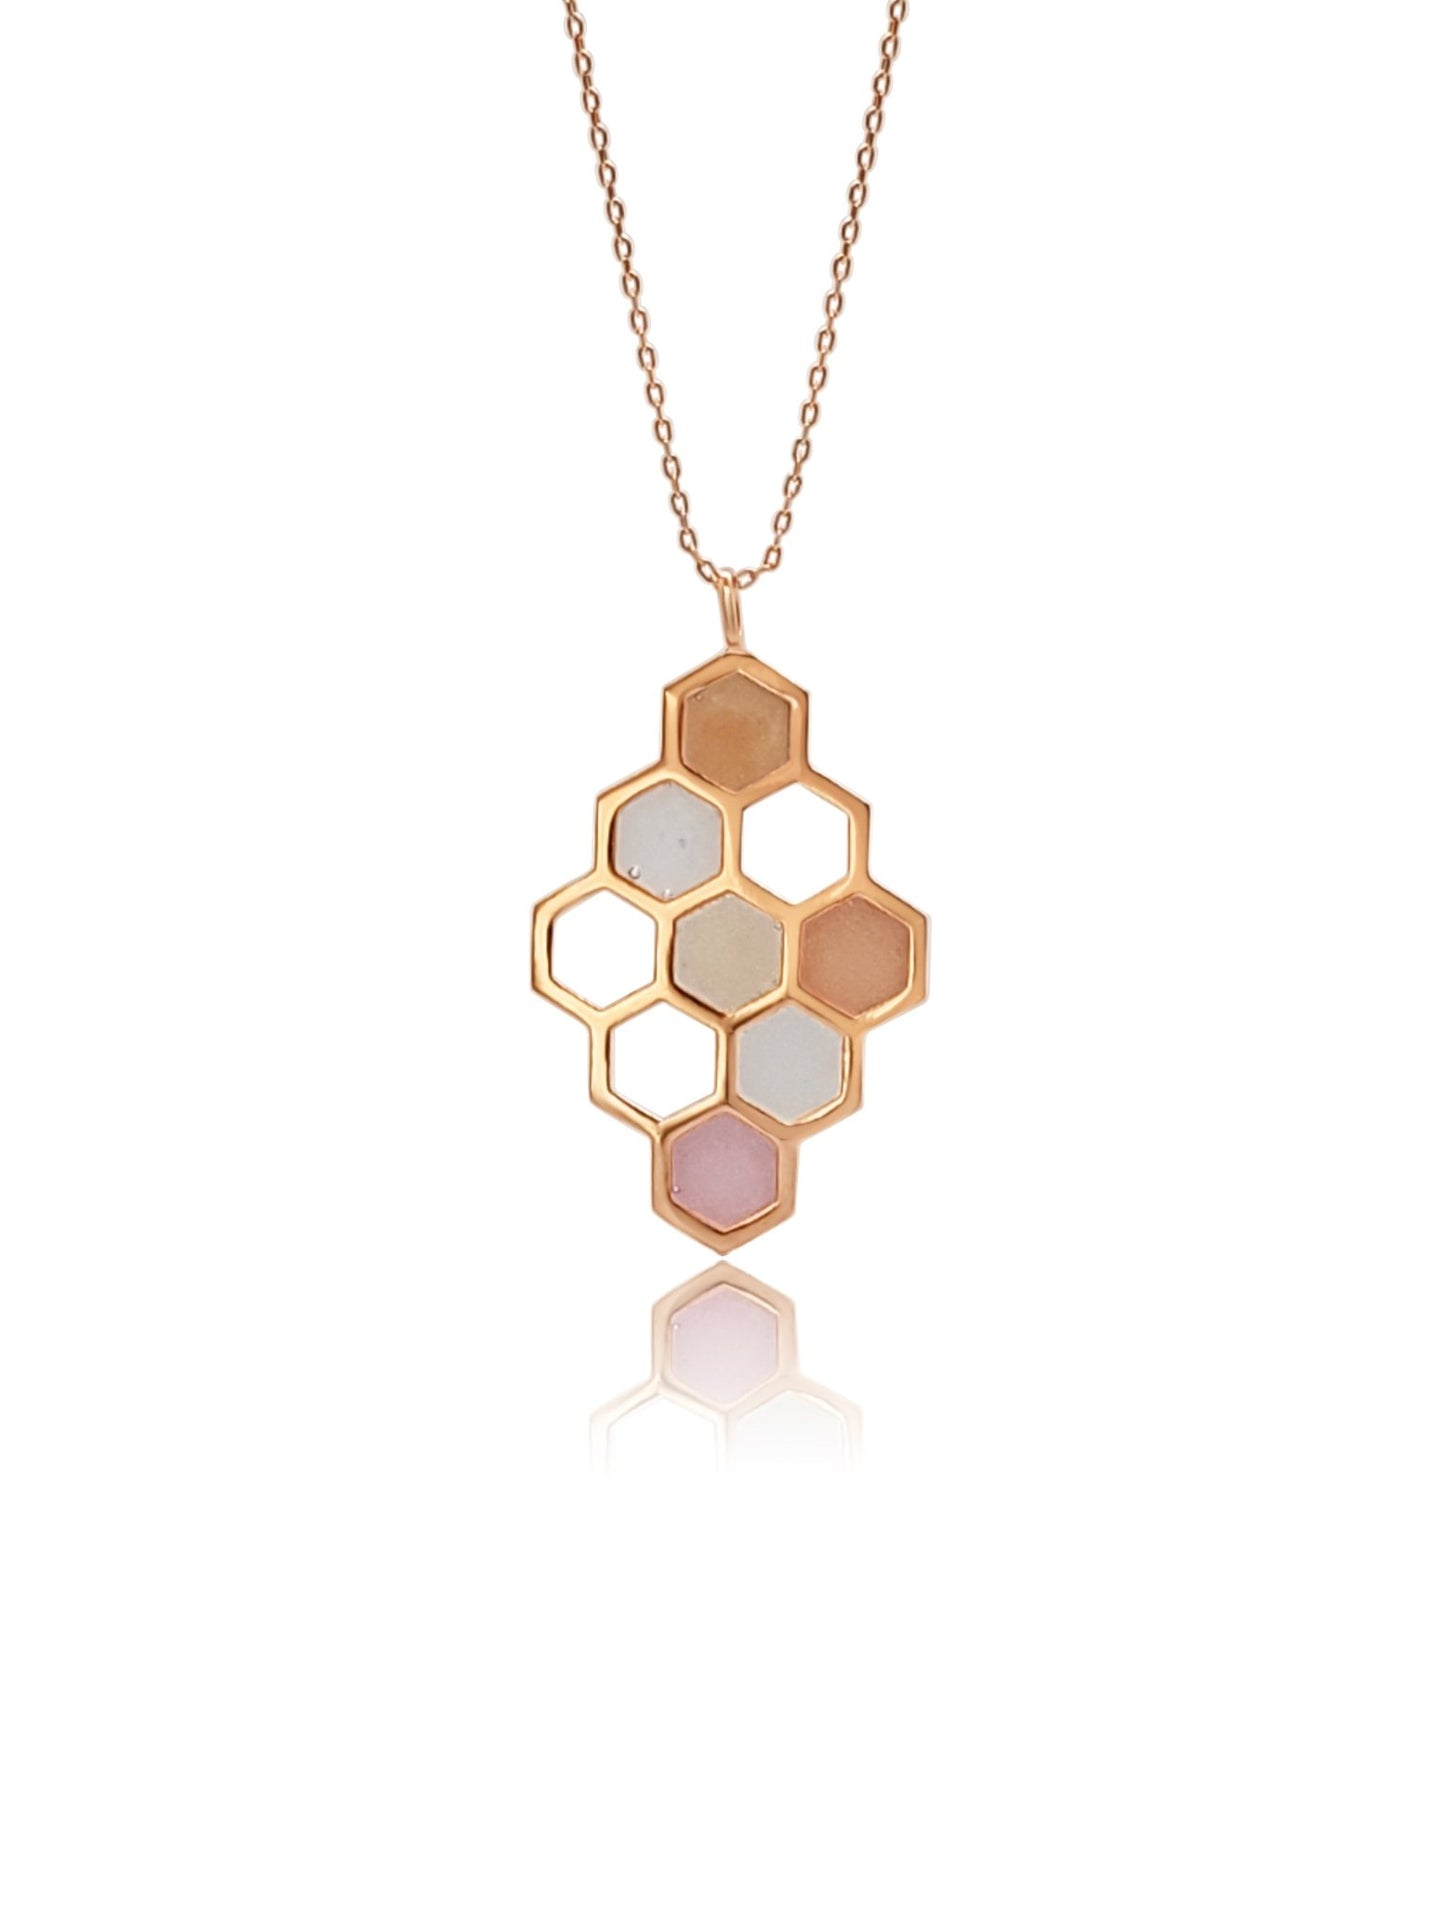 18k Rose Gold Vermeil honeycomb necklace with the individual hexagons filled with soft yellows, golds and pinks. colorful pendant necklace